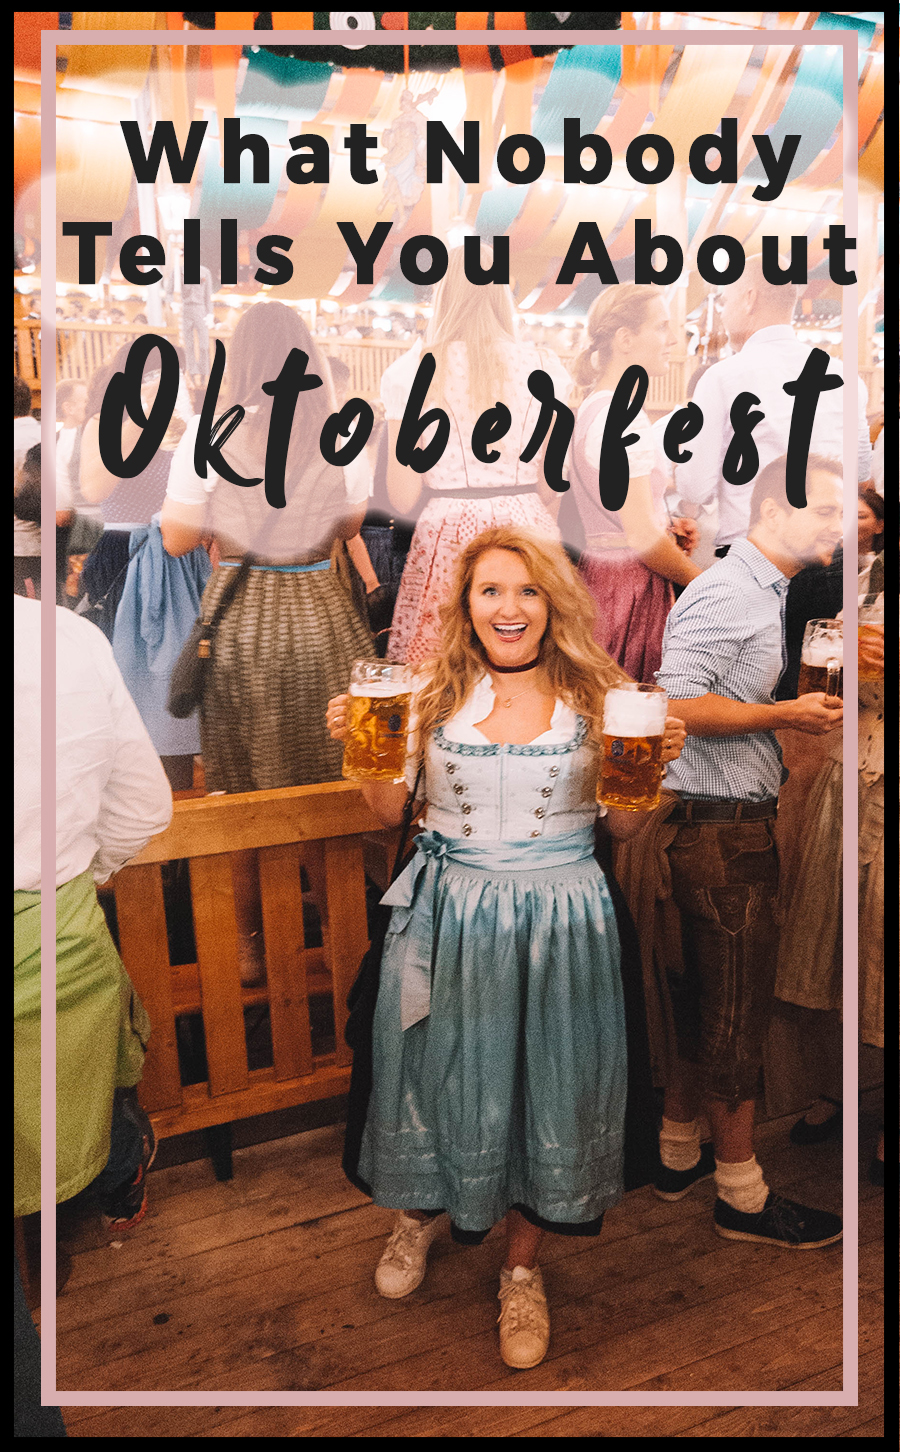 What Nobody Tells You About Oktoberfest